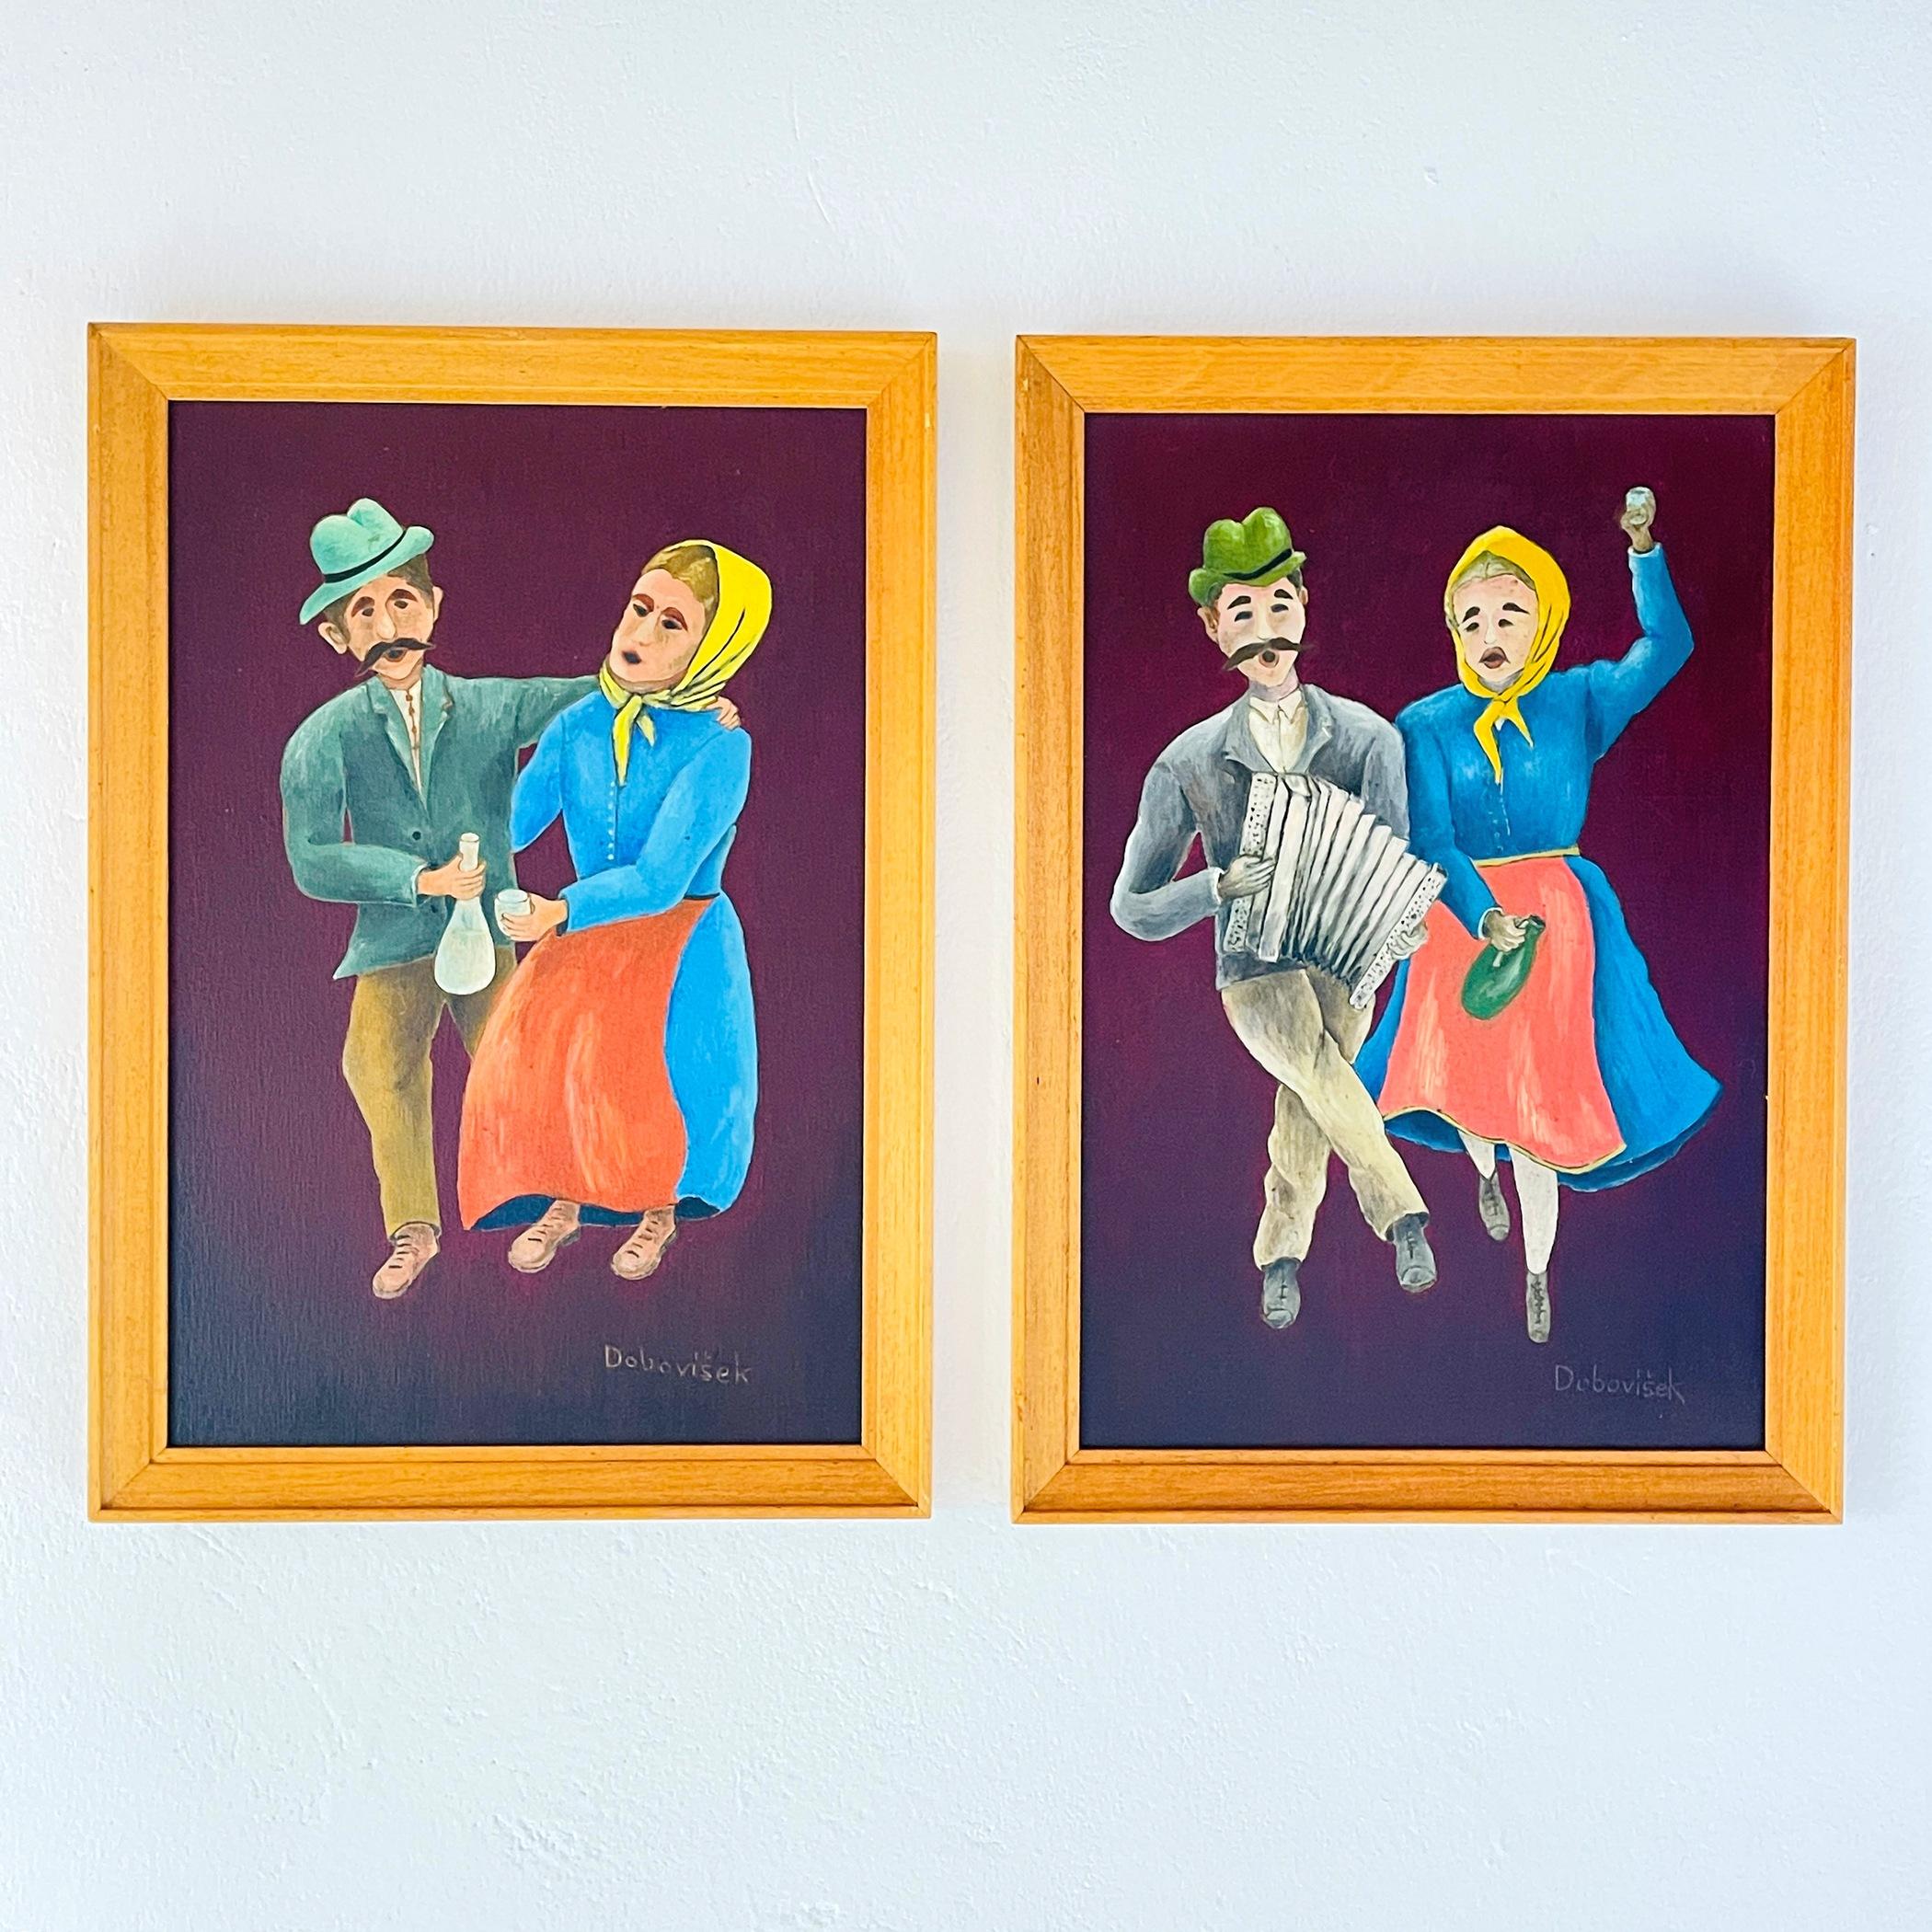 Immerse yourself in the charming and whimsical world of rural life with this captivating set of two diptych paintings of style Naive Art by Oto Dobovišek, an artist from Yugoslavia in the 1970s. These delightful pieces of folk art depict scenes of